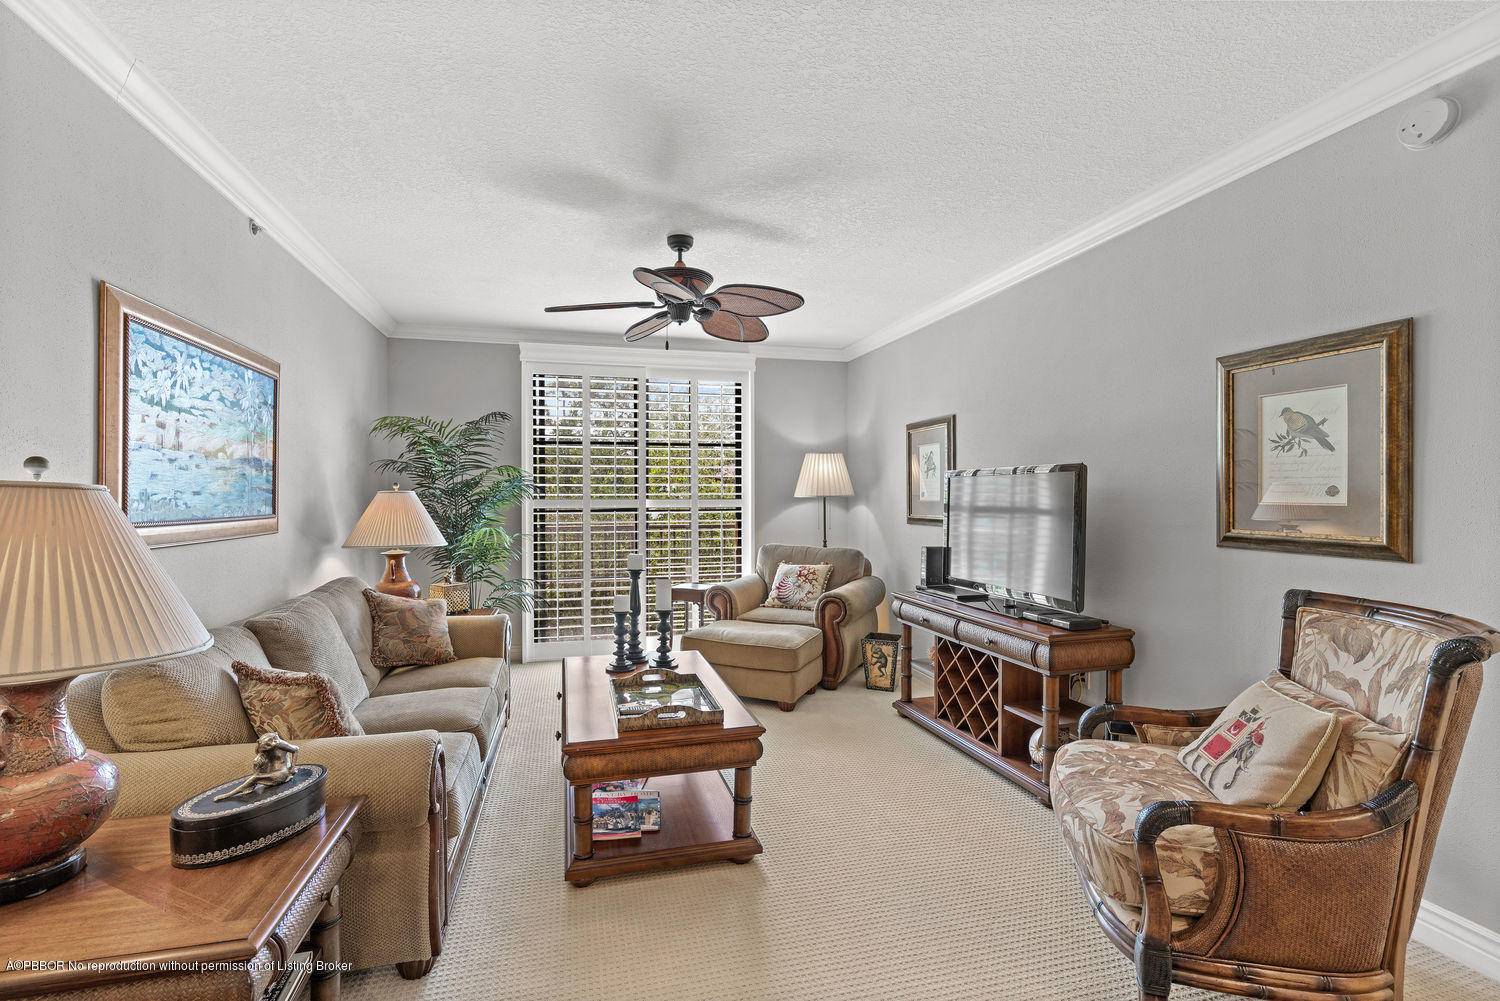 Renovated 2 bedroom 2 bath condo in the heart of West Palm Beach's revamped Rosemary Square.